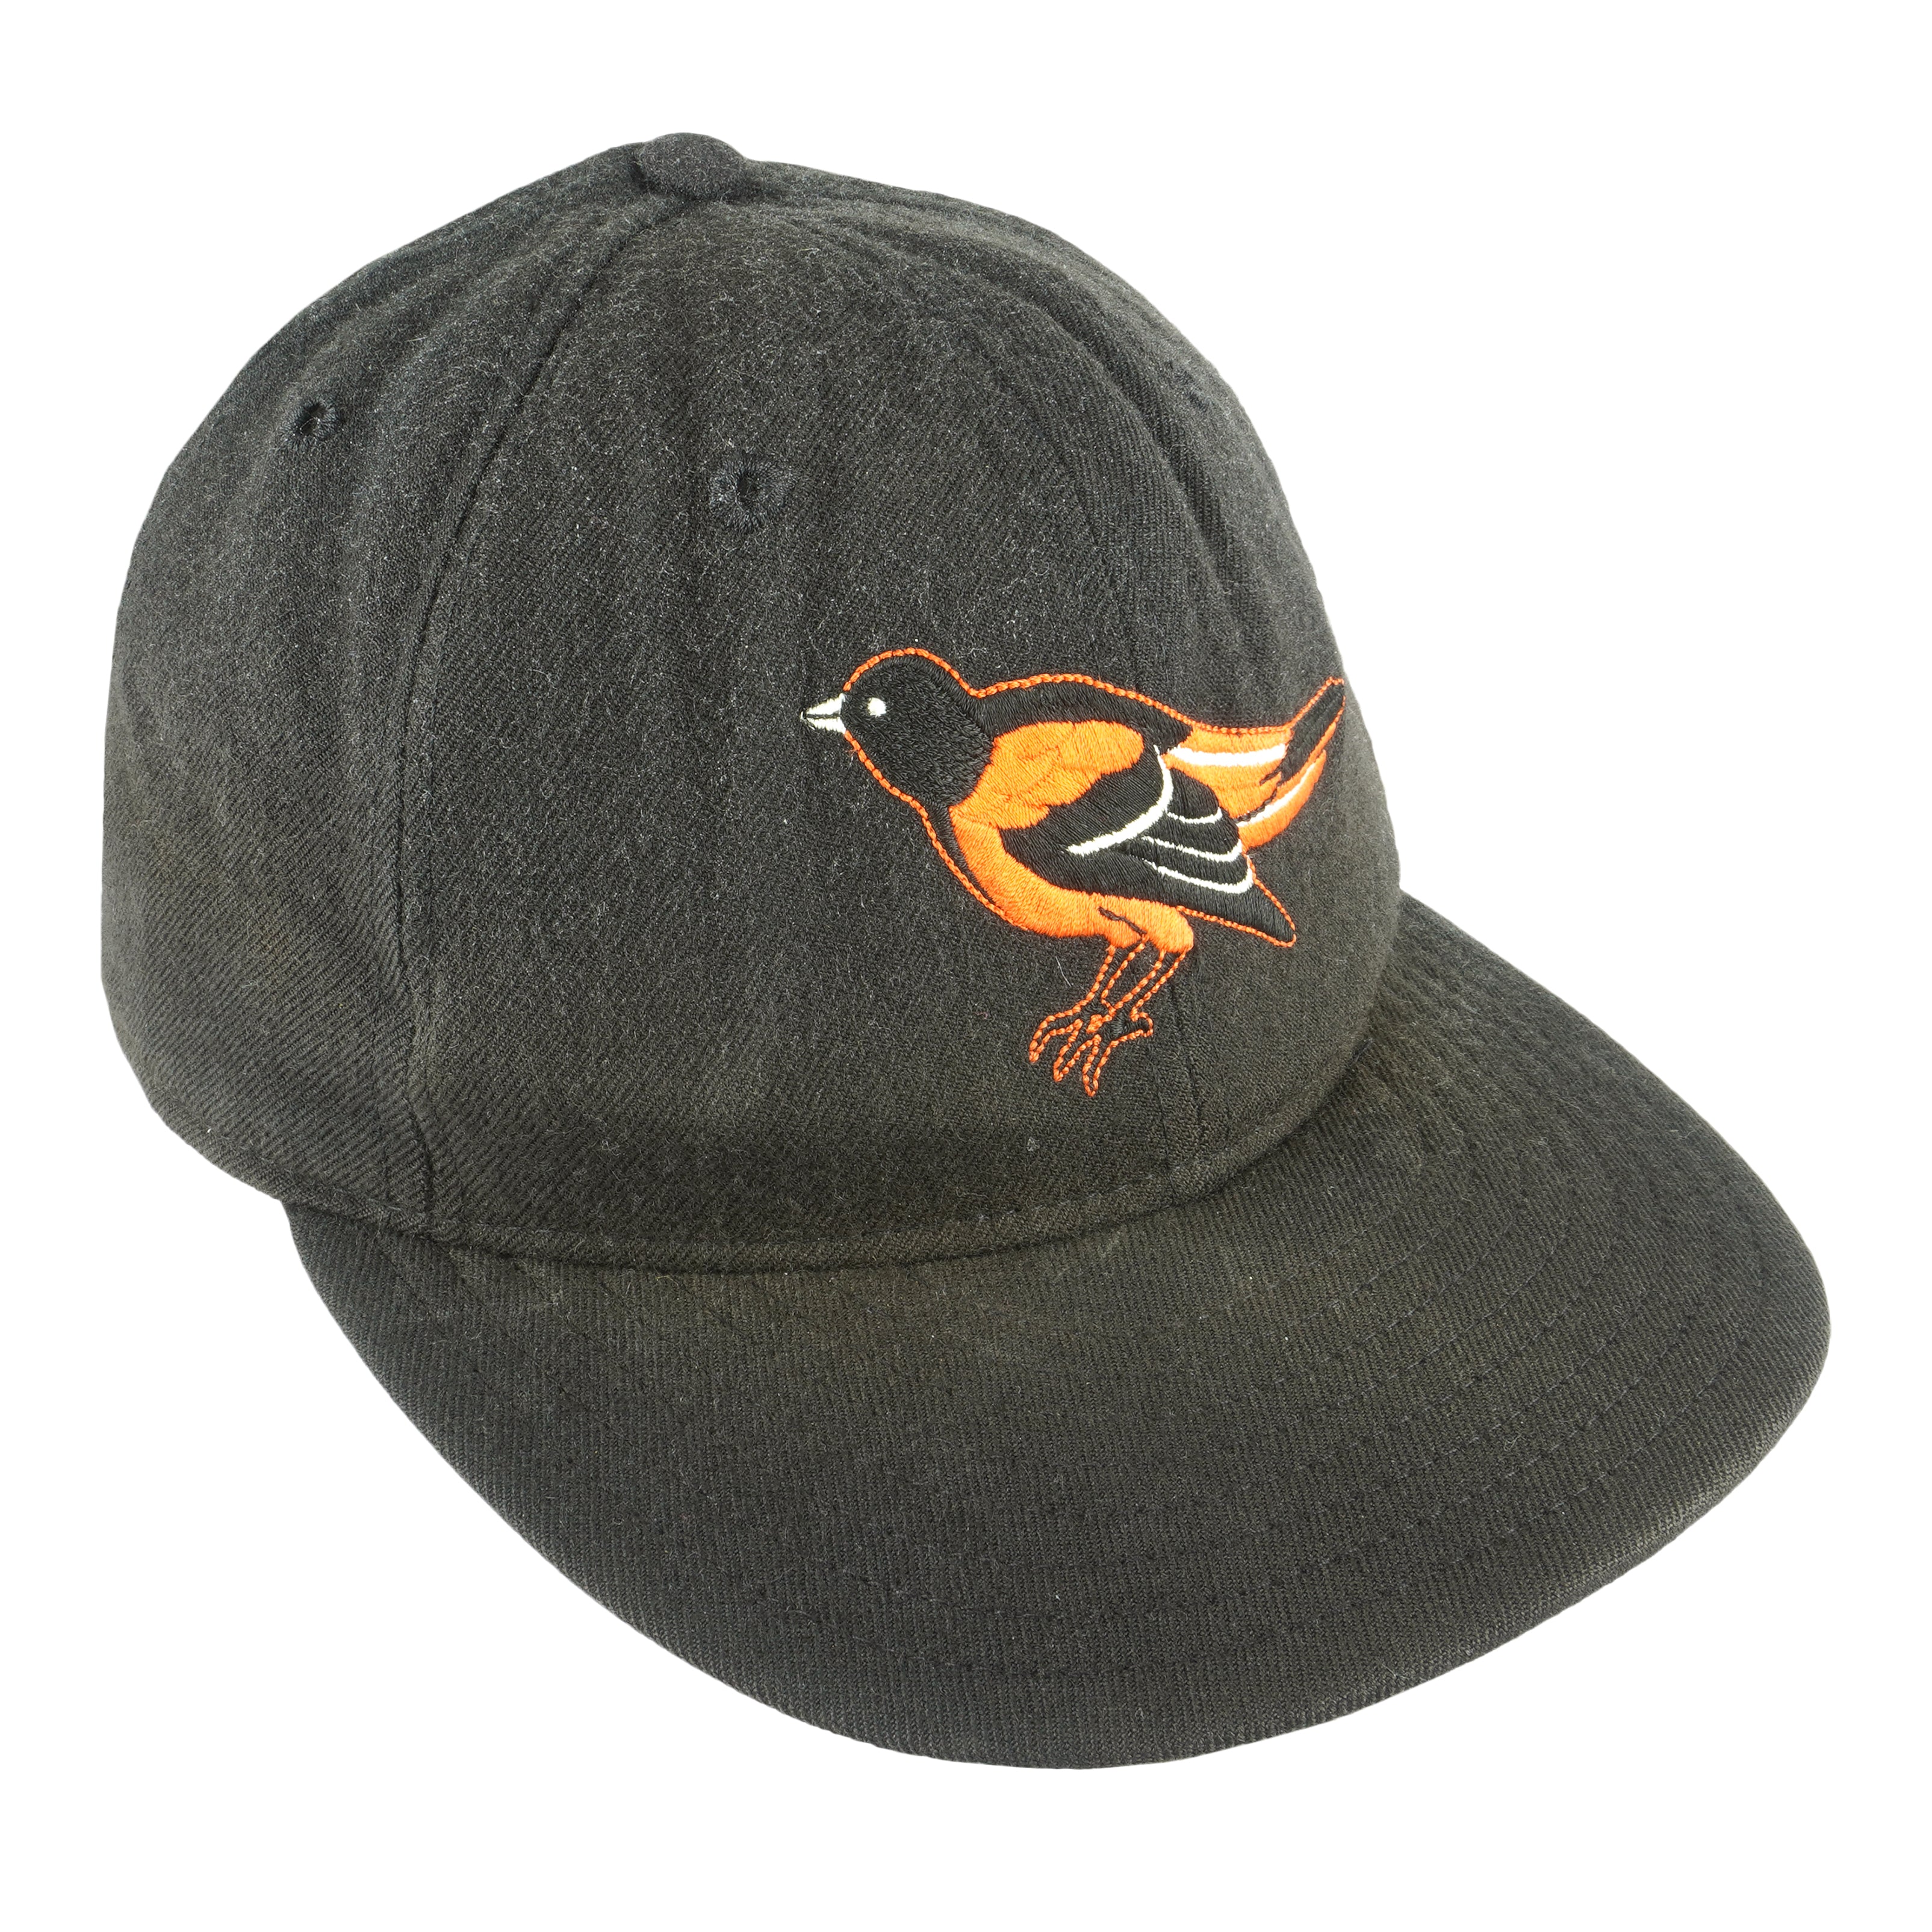 Vintage MLB (New Era) - Baltimore Orioles Embroidered Fitted Hat 1990s 7 1/4